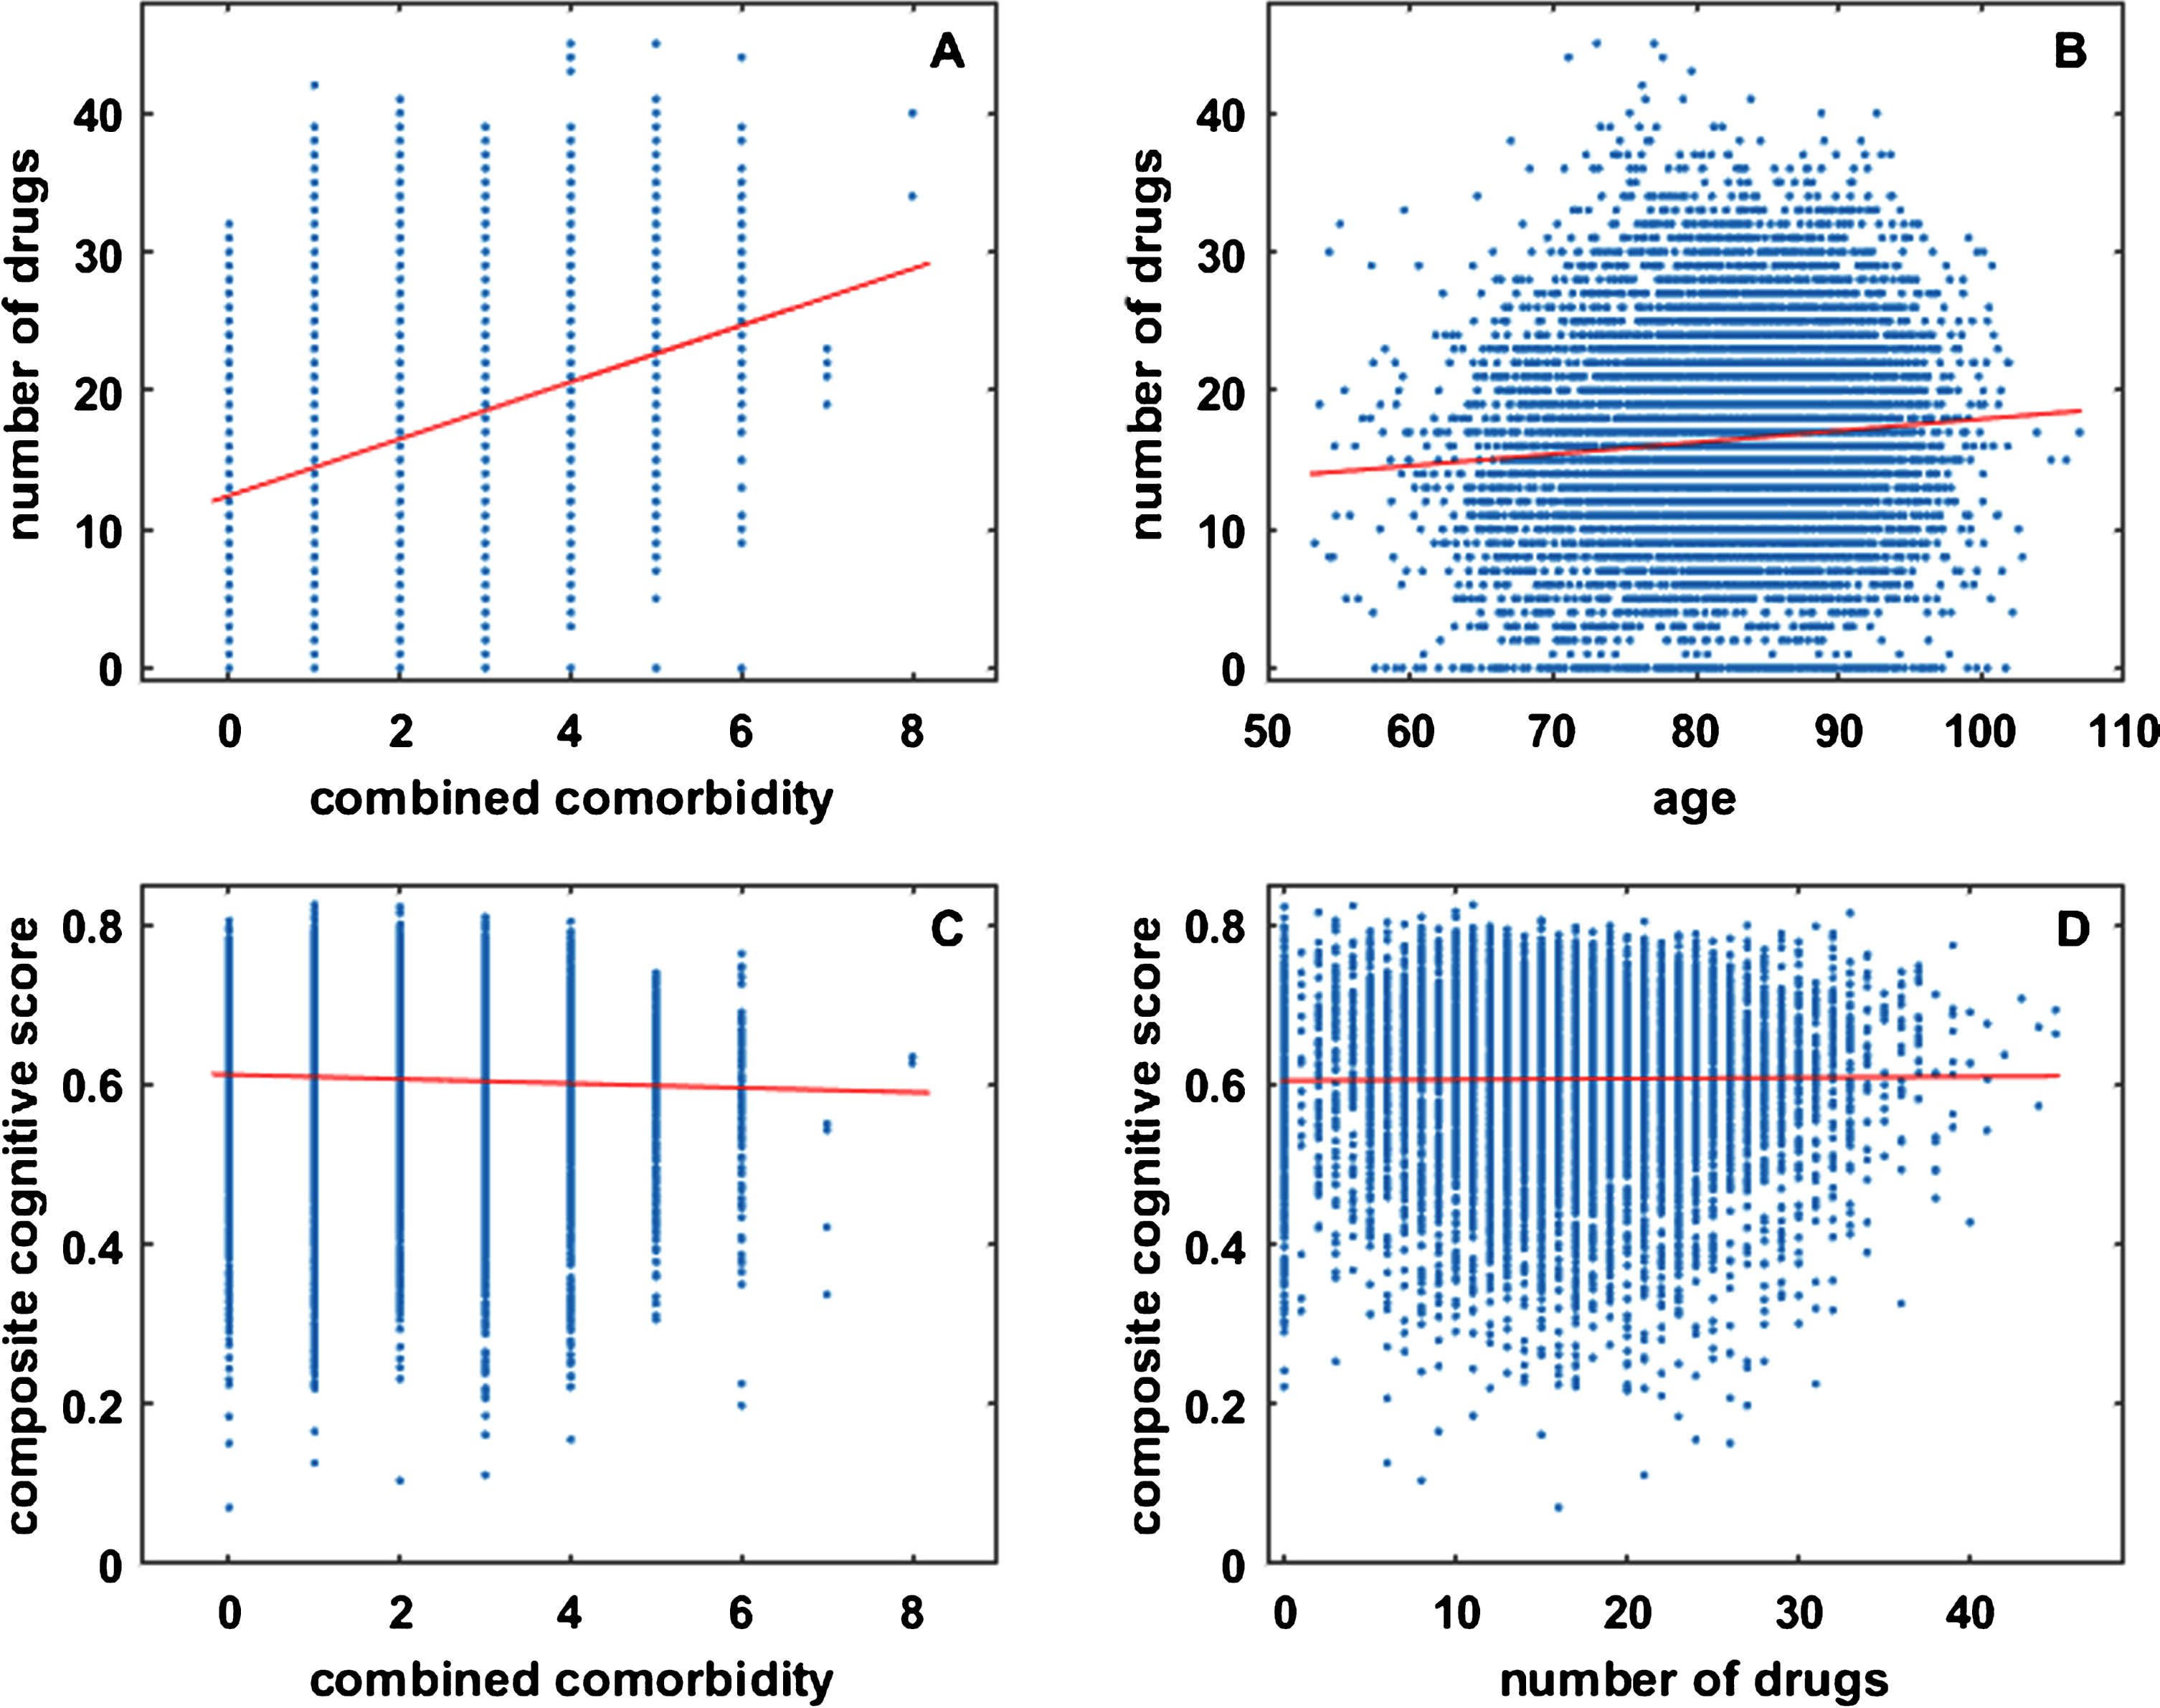 RADC participants took more drugs as they aged and developed comorbidity, but their cognitive scores were not strongly dependent on comorbidity or number of drugs taken. Each dot in each plot represents data for one of the 8,675 participant visits in the RADC dataset for which complete information on age, cognition, comorbidities, and drugs taken is available. Note that combined comorbidity and number of drugs are integer valued and many dots overlay each other. The number of drugs taken by RADC participants overall increases with comorbidity (A) or with age (B), but composite cognitive score is only very weakly correlated with comorbidity (C), and there is no correlation between composite cognitive score and the number of drugs taken by a RADC participant (D).